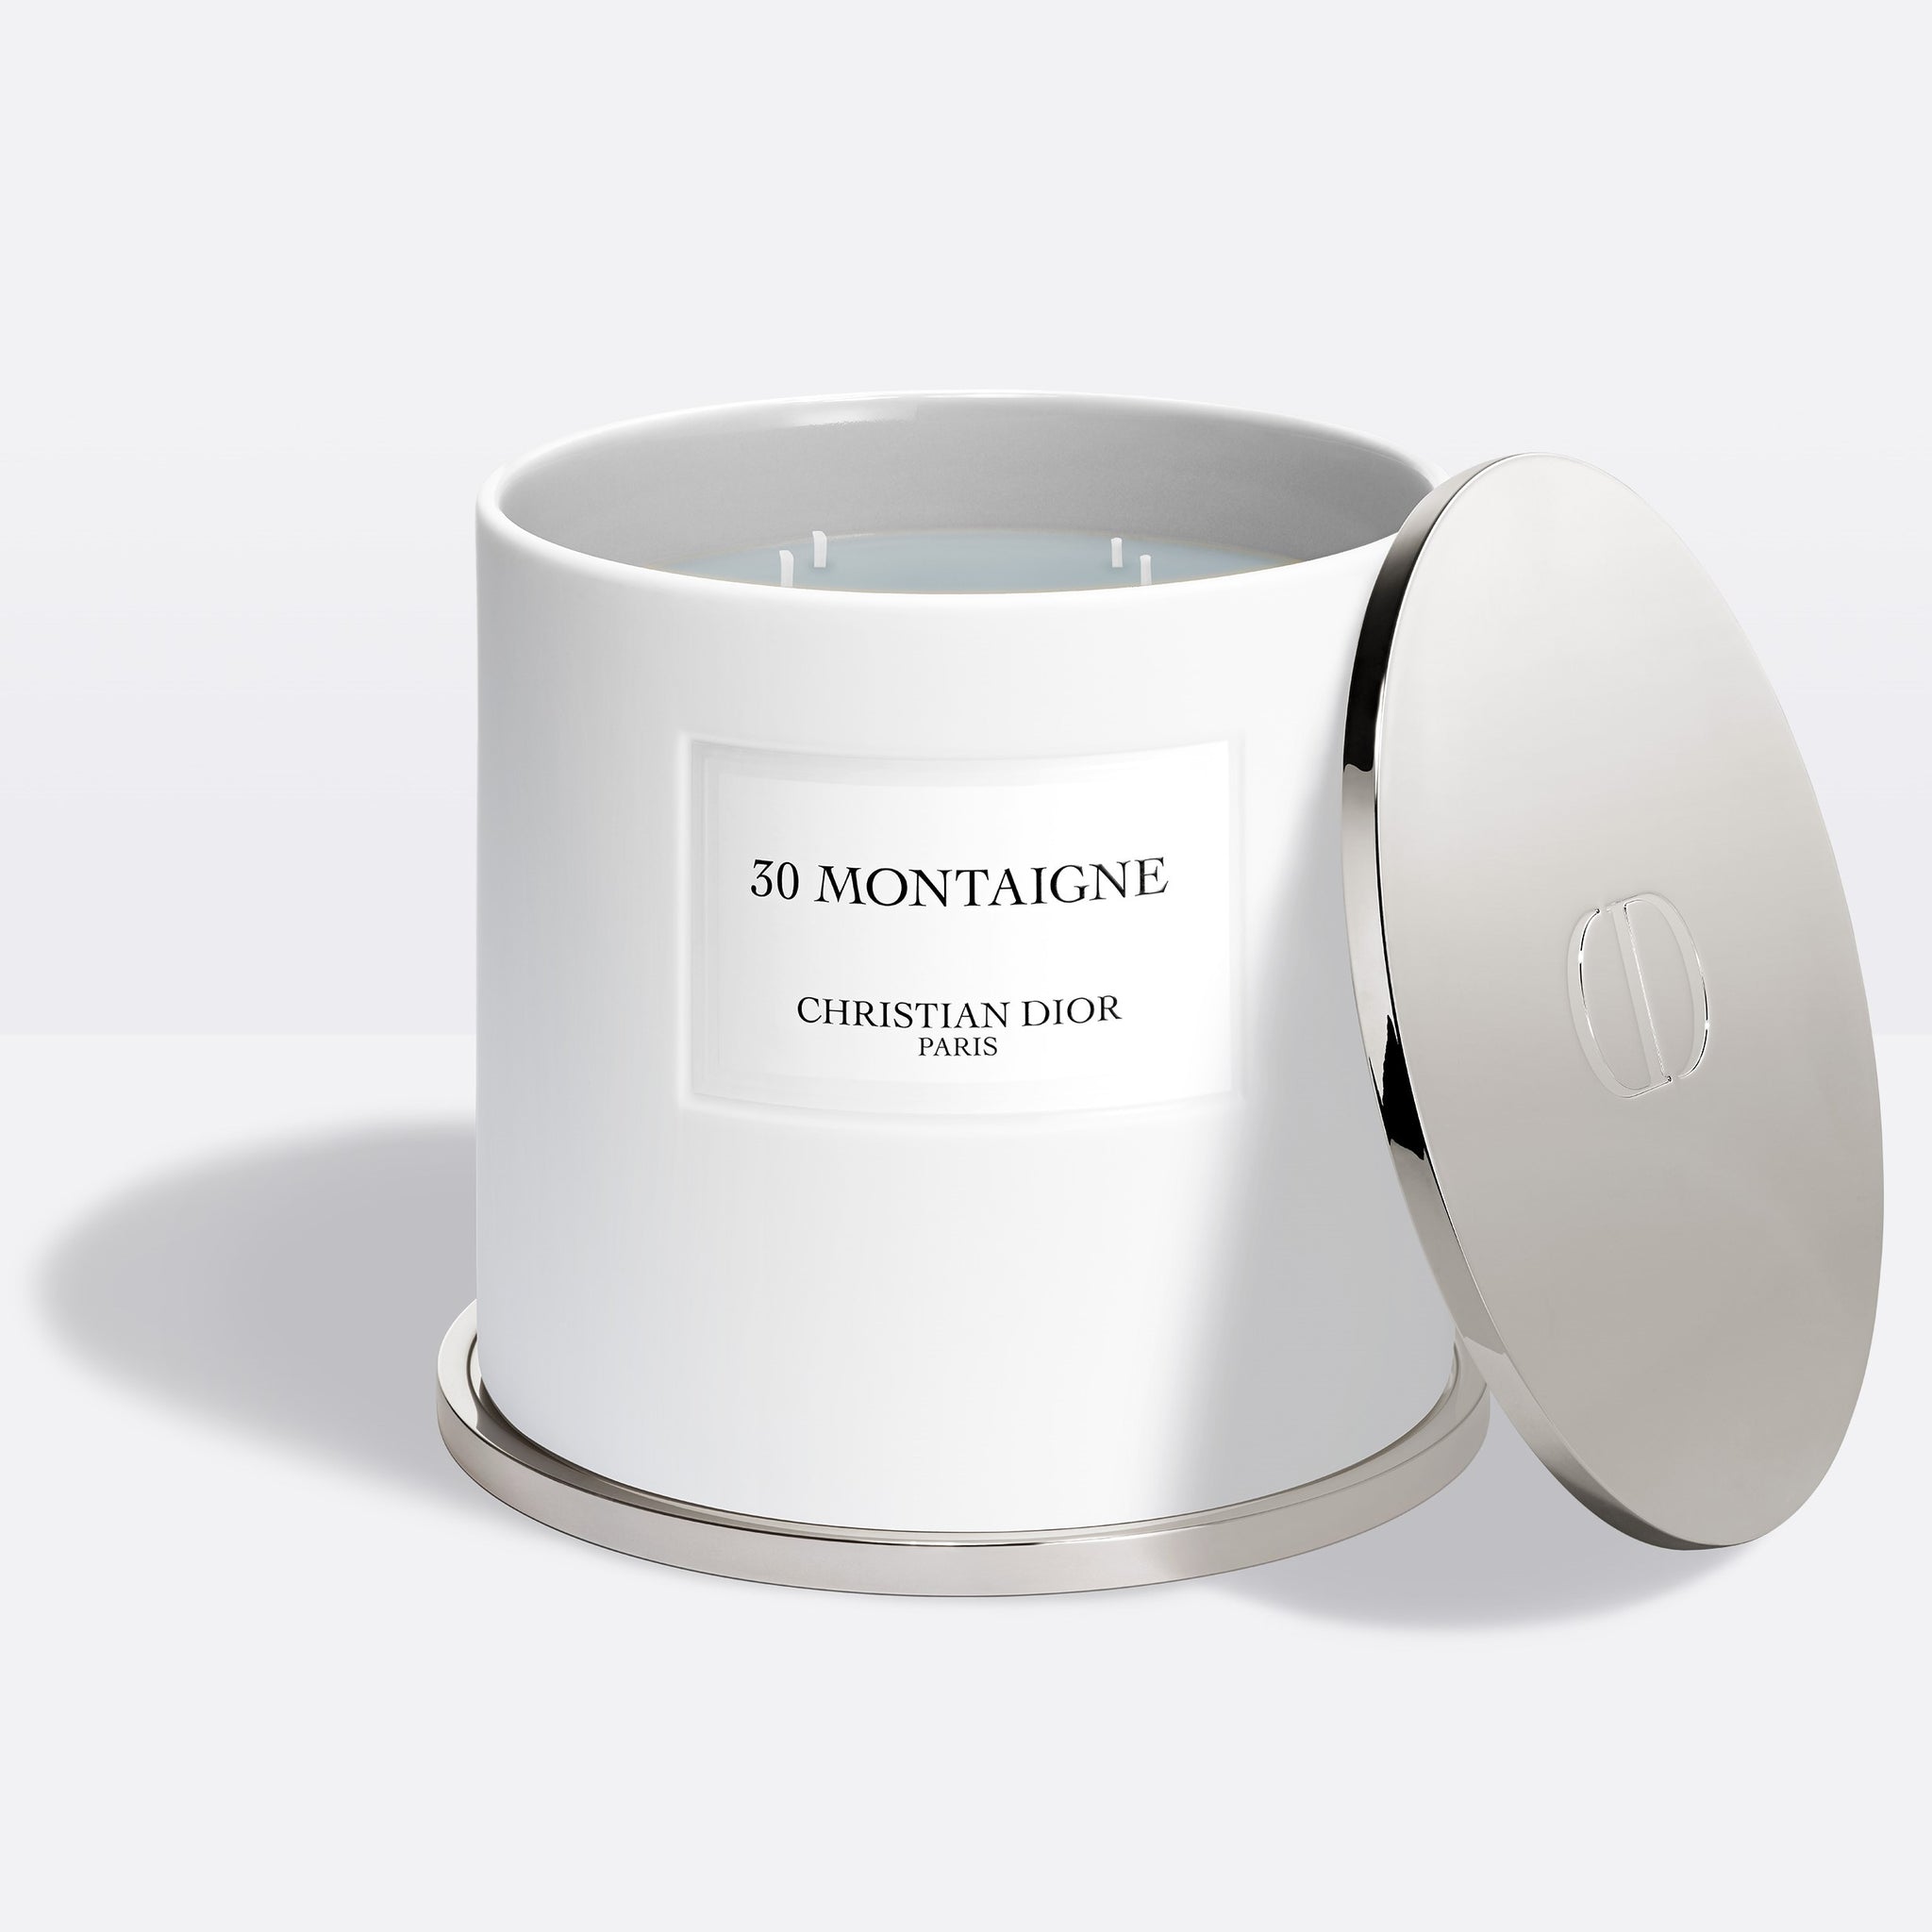 30 MONTAIGNE GIANT CANDLE ~ Scented Candle - Amber and Spicy Notes - 1.5 kg